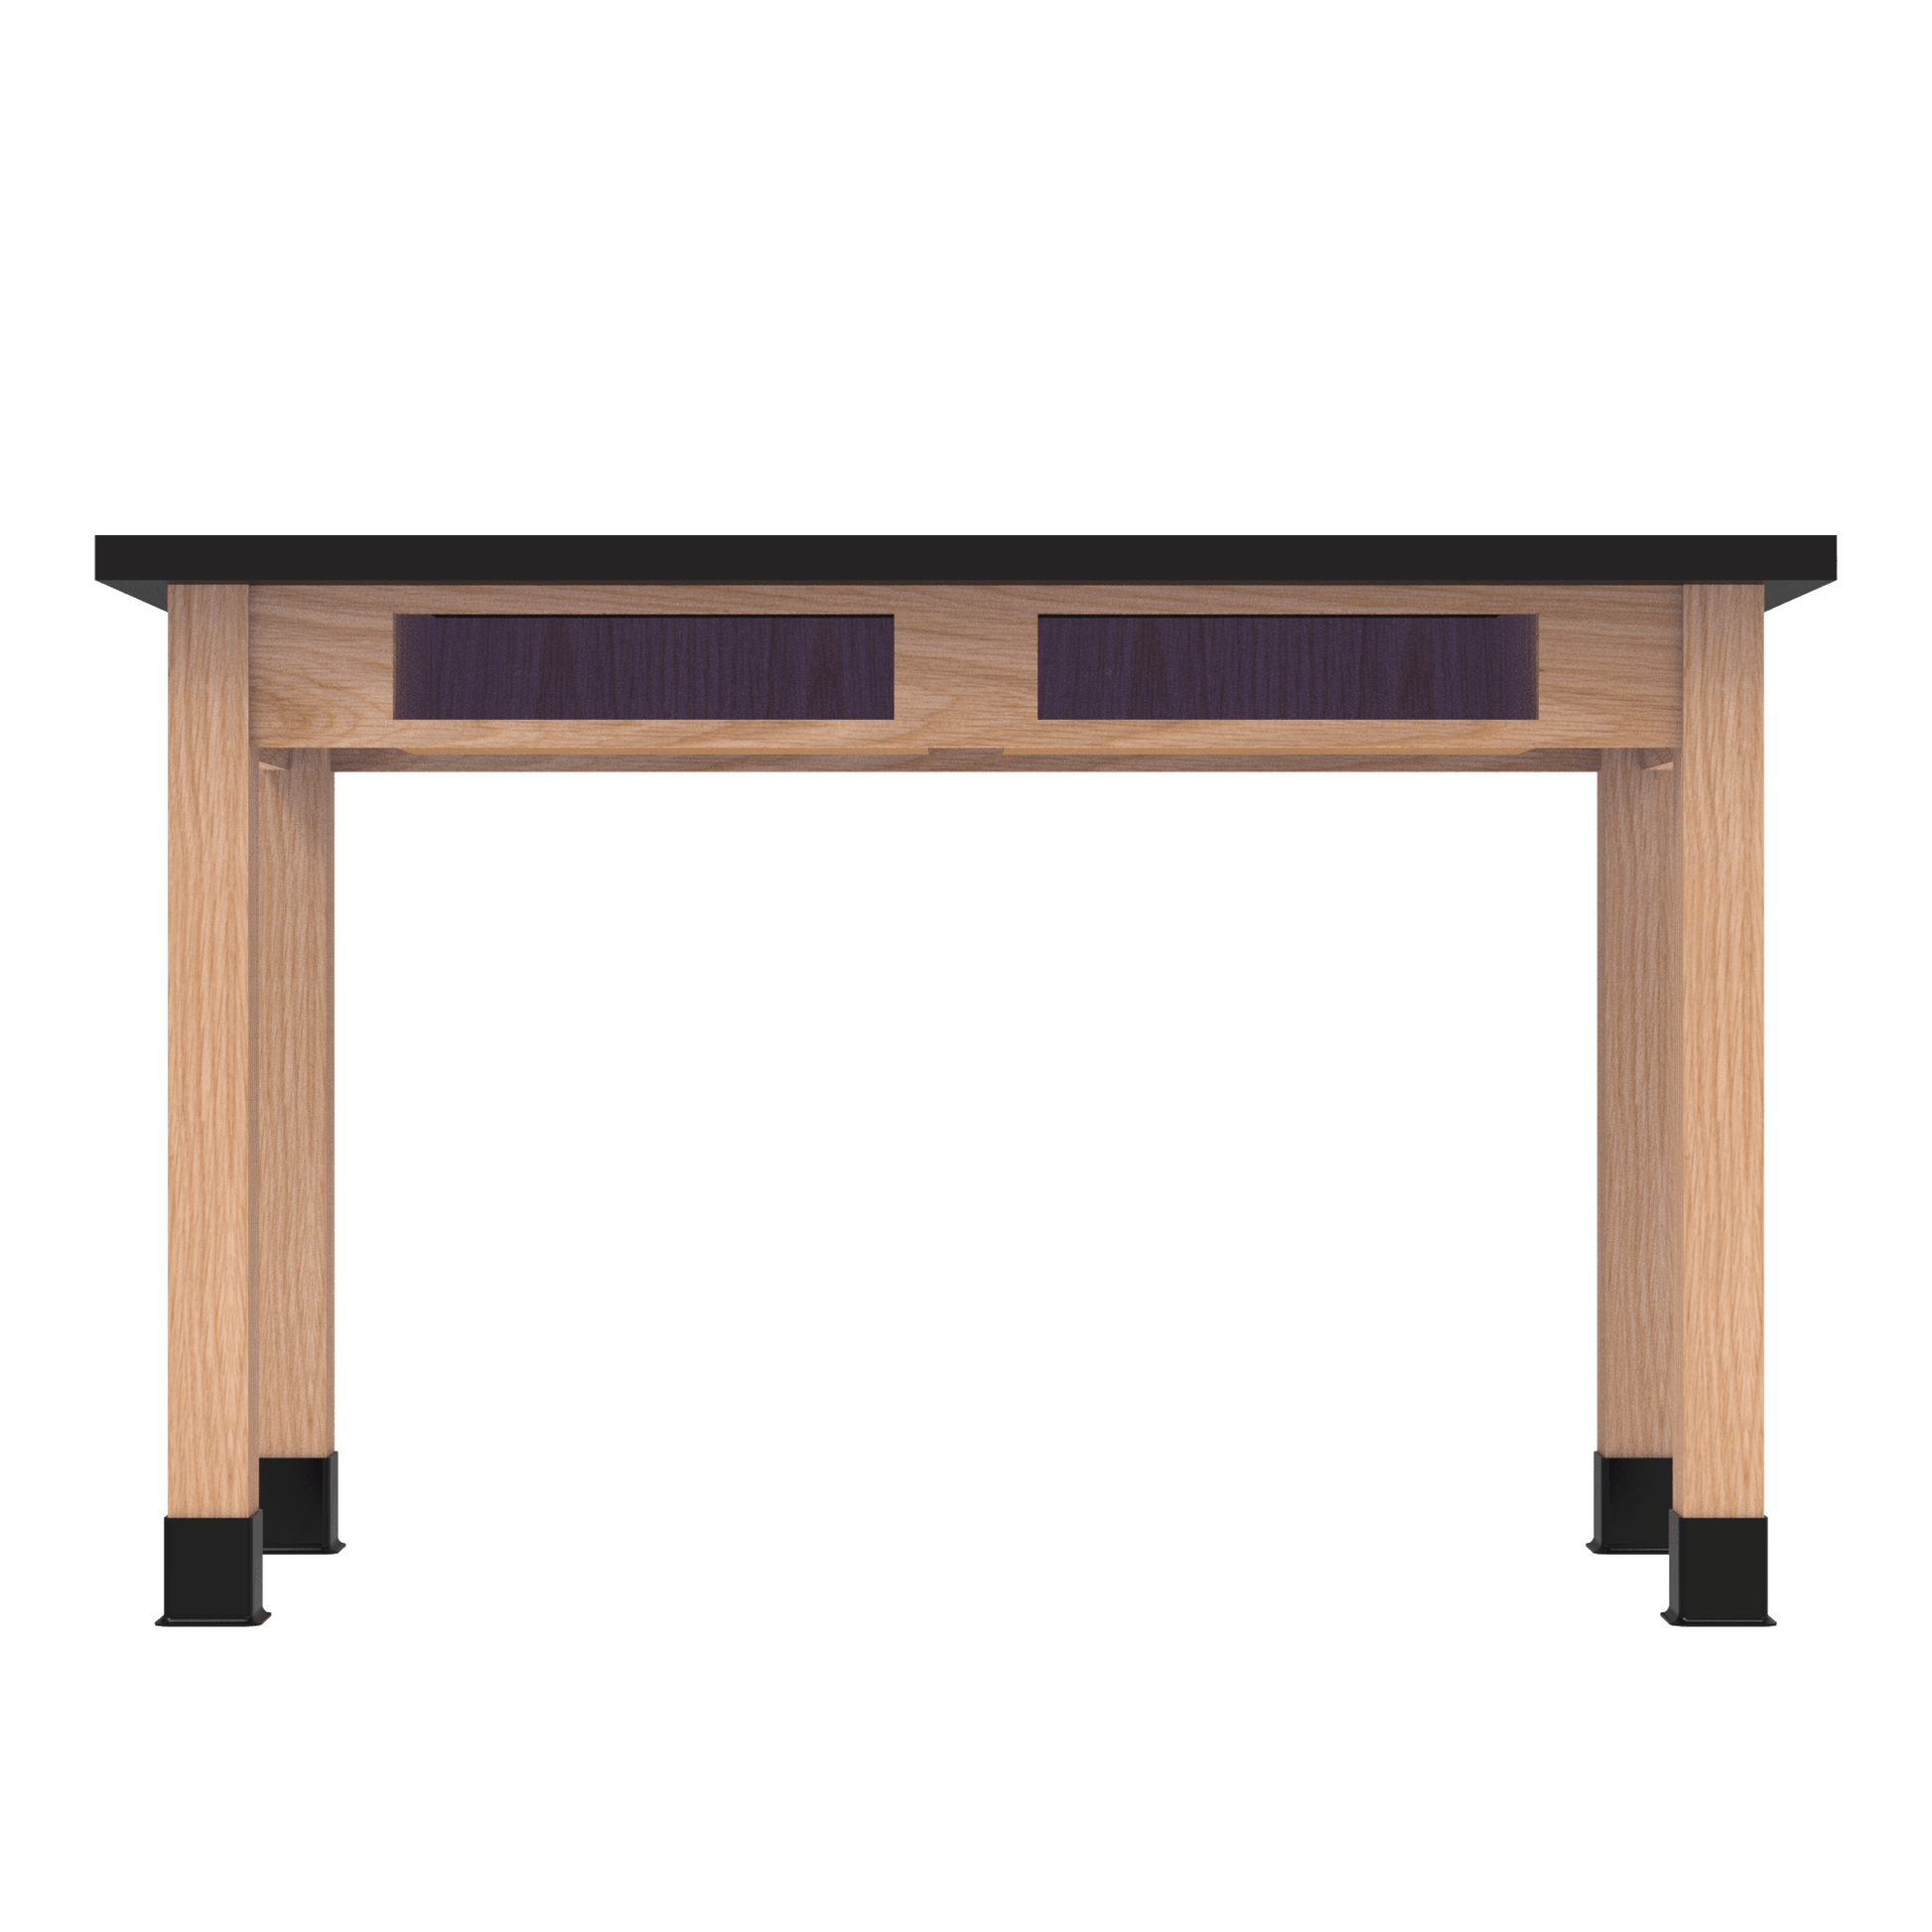 Diversified Woodcrafts Science Table w/ Book Compartment - 48" W x 30" D - Solid Oak Frame and Adjustable Glides - SchoolOutlet